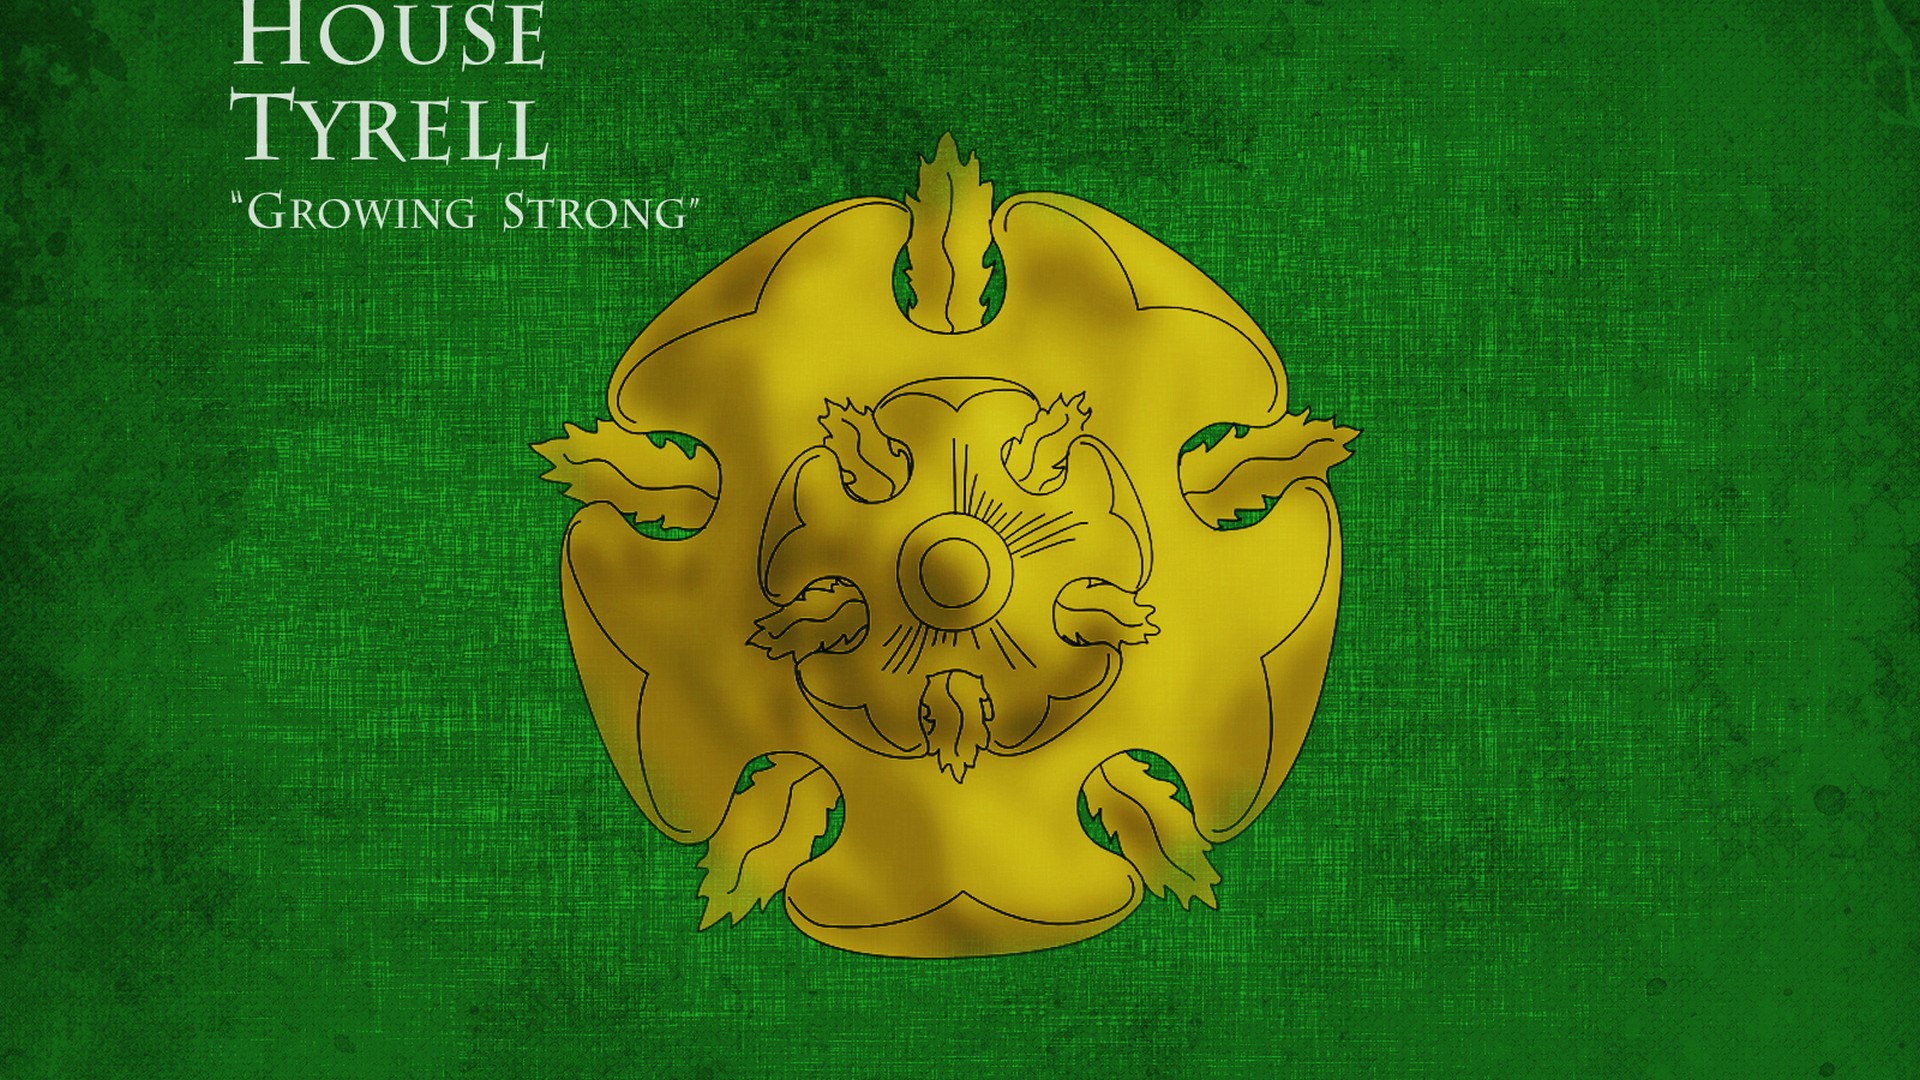 House Tyrell Game of Thrones Poster Wallpaper With high-resolution 1920X1080 pixel. You can use this poster wallpaper for your Desktop Computers, Mac Screensavers, Windows Backgrounds, iPhone Wallpapers, Tablet or Android Lock screen and another Mobile device